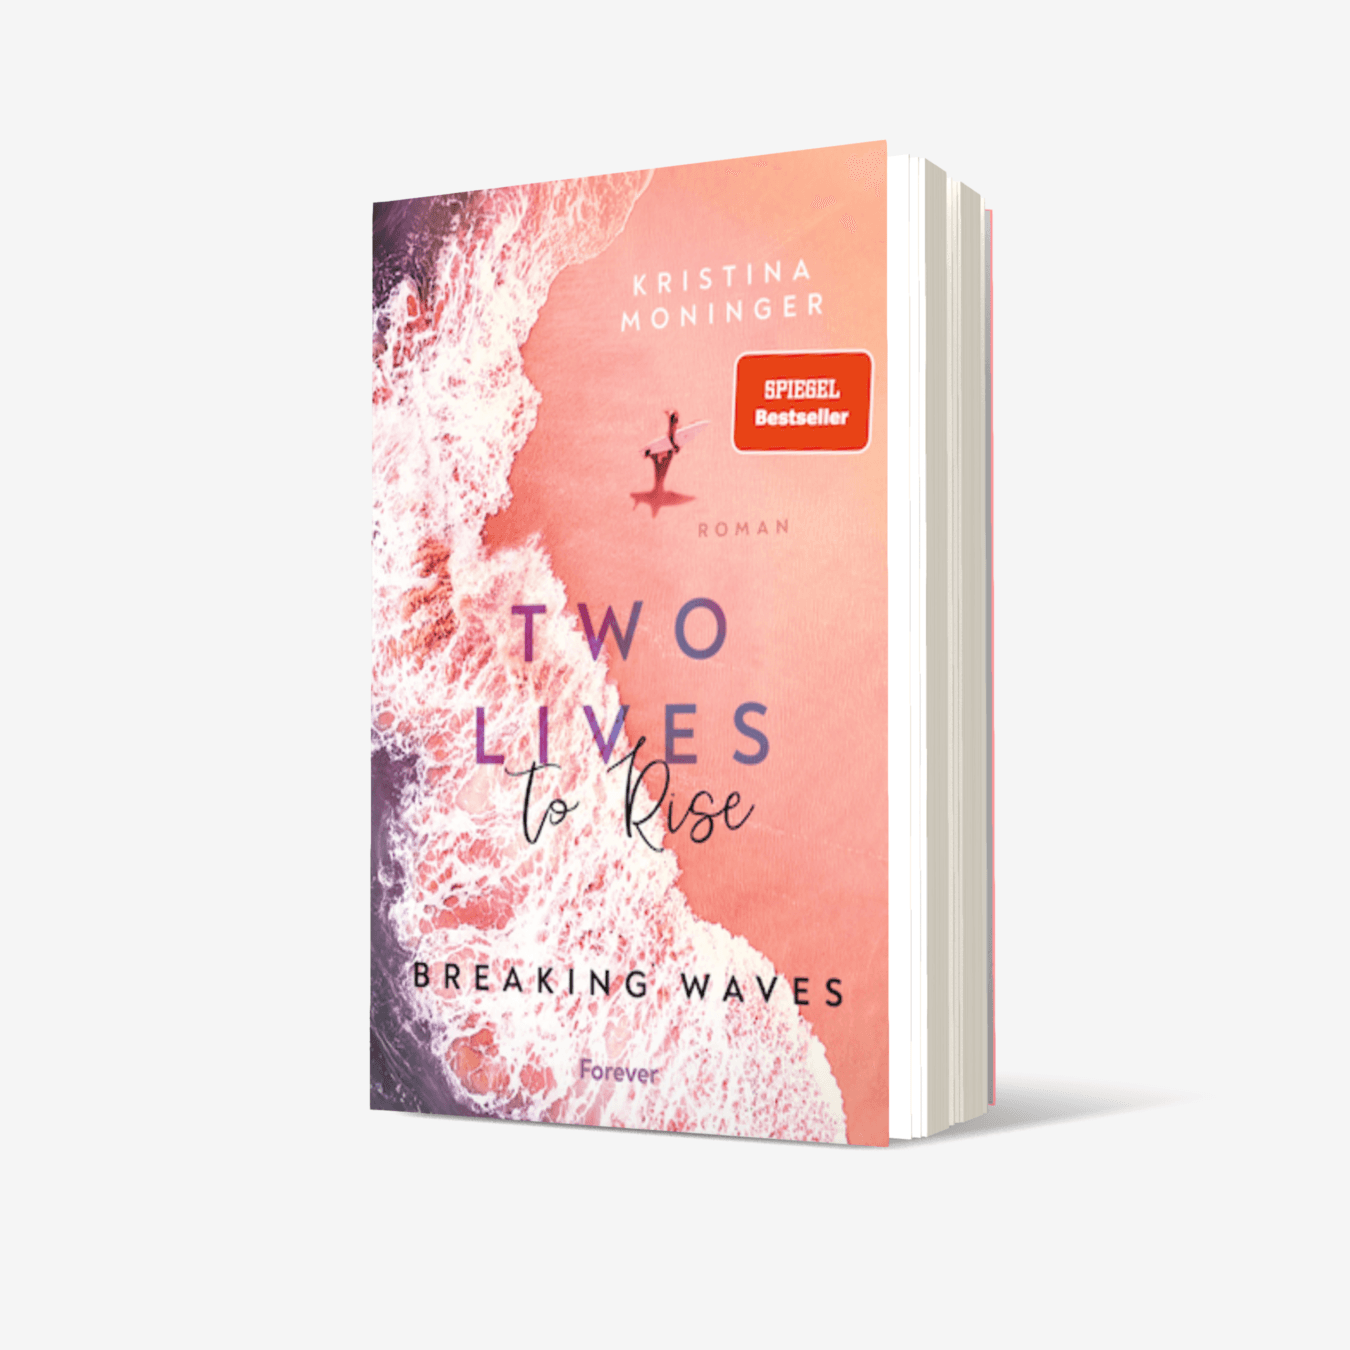 Buchcover von Two Lives to Rise (Breaking Waves 2)